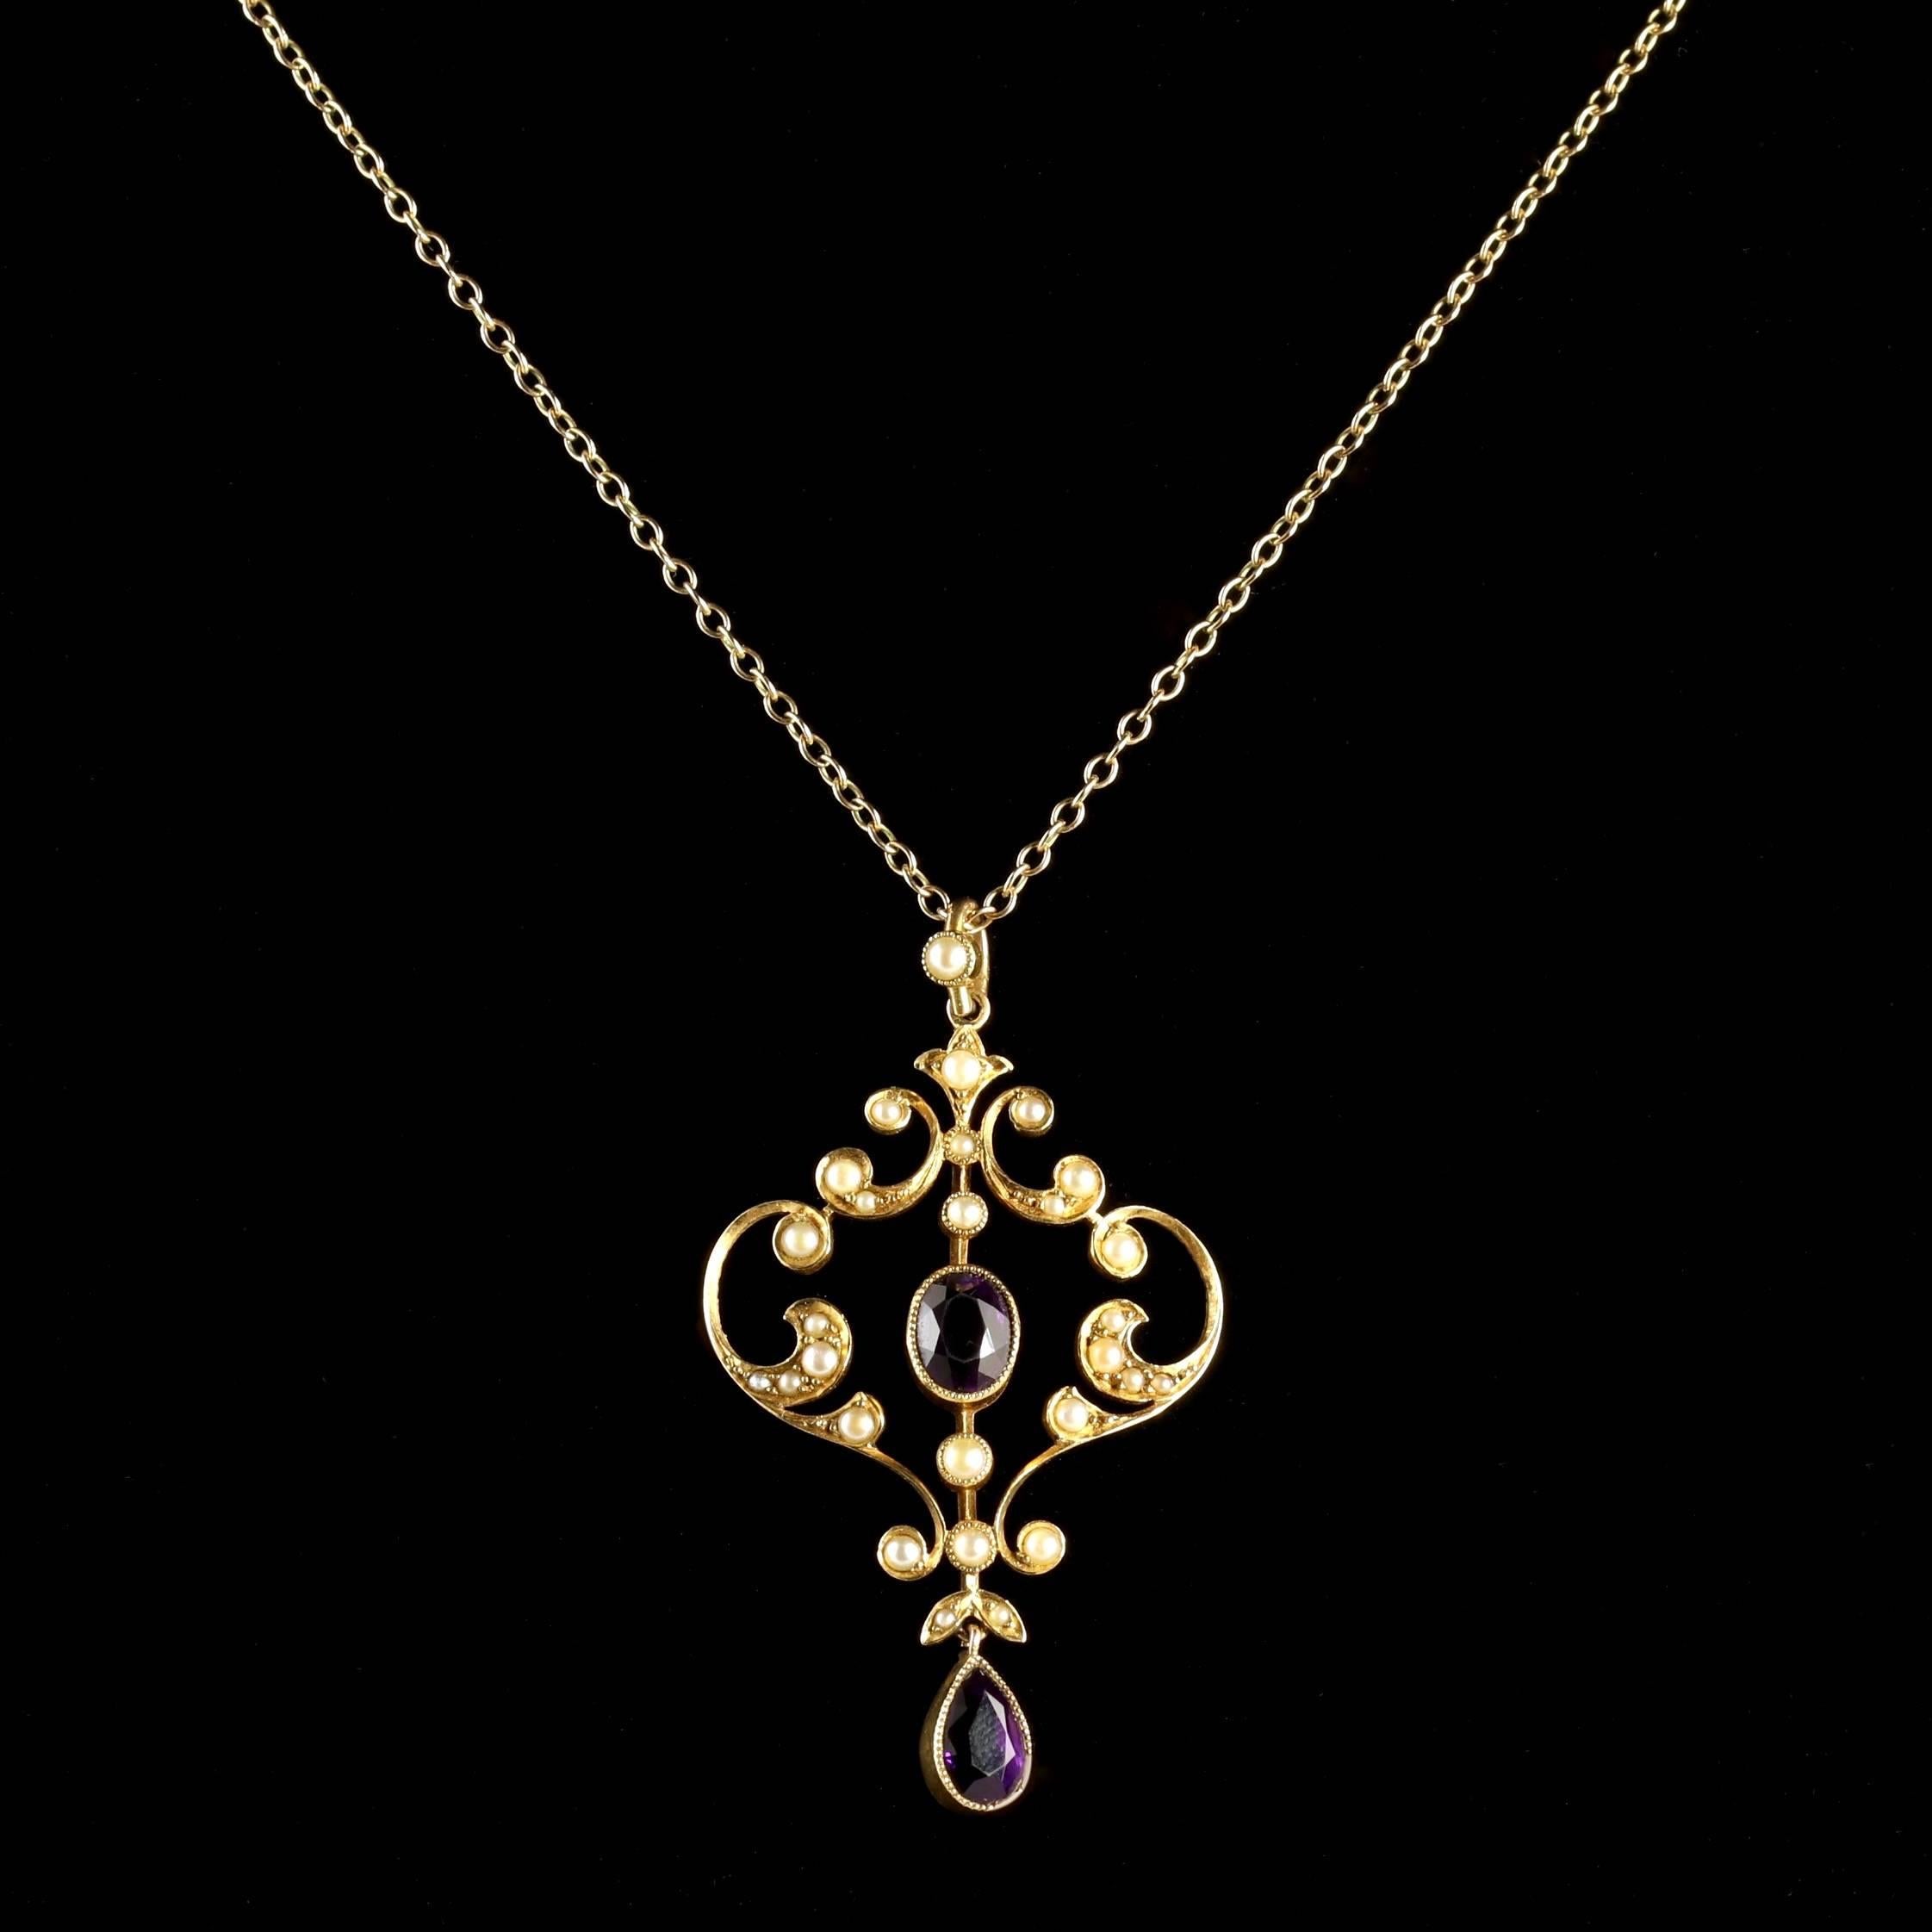 This very beautiful 15ct Yellow Gold pendant and chain is Circa 1900.

Beautiful deep purple Amethysts adorn this lovely pendant complete with a 15ct Yellow Gold chain.

Amethyst has been highly esteemed throughout the ages for its stunning beauty